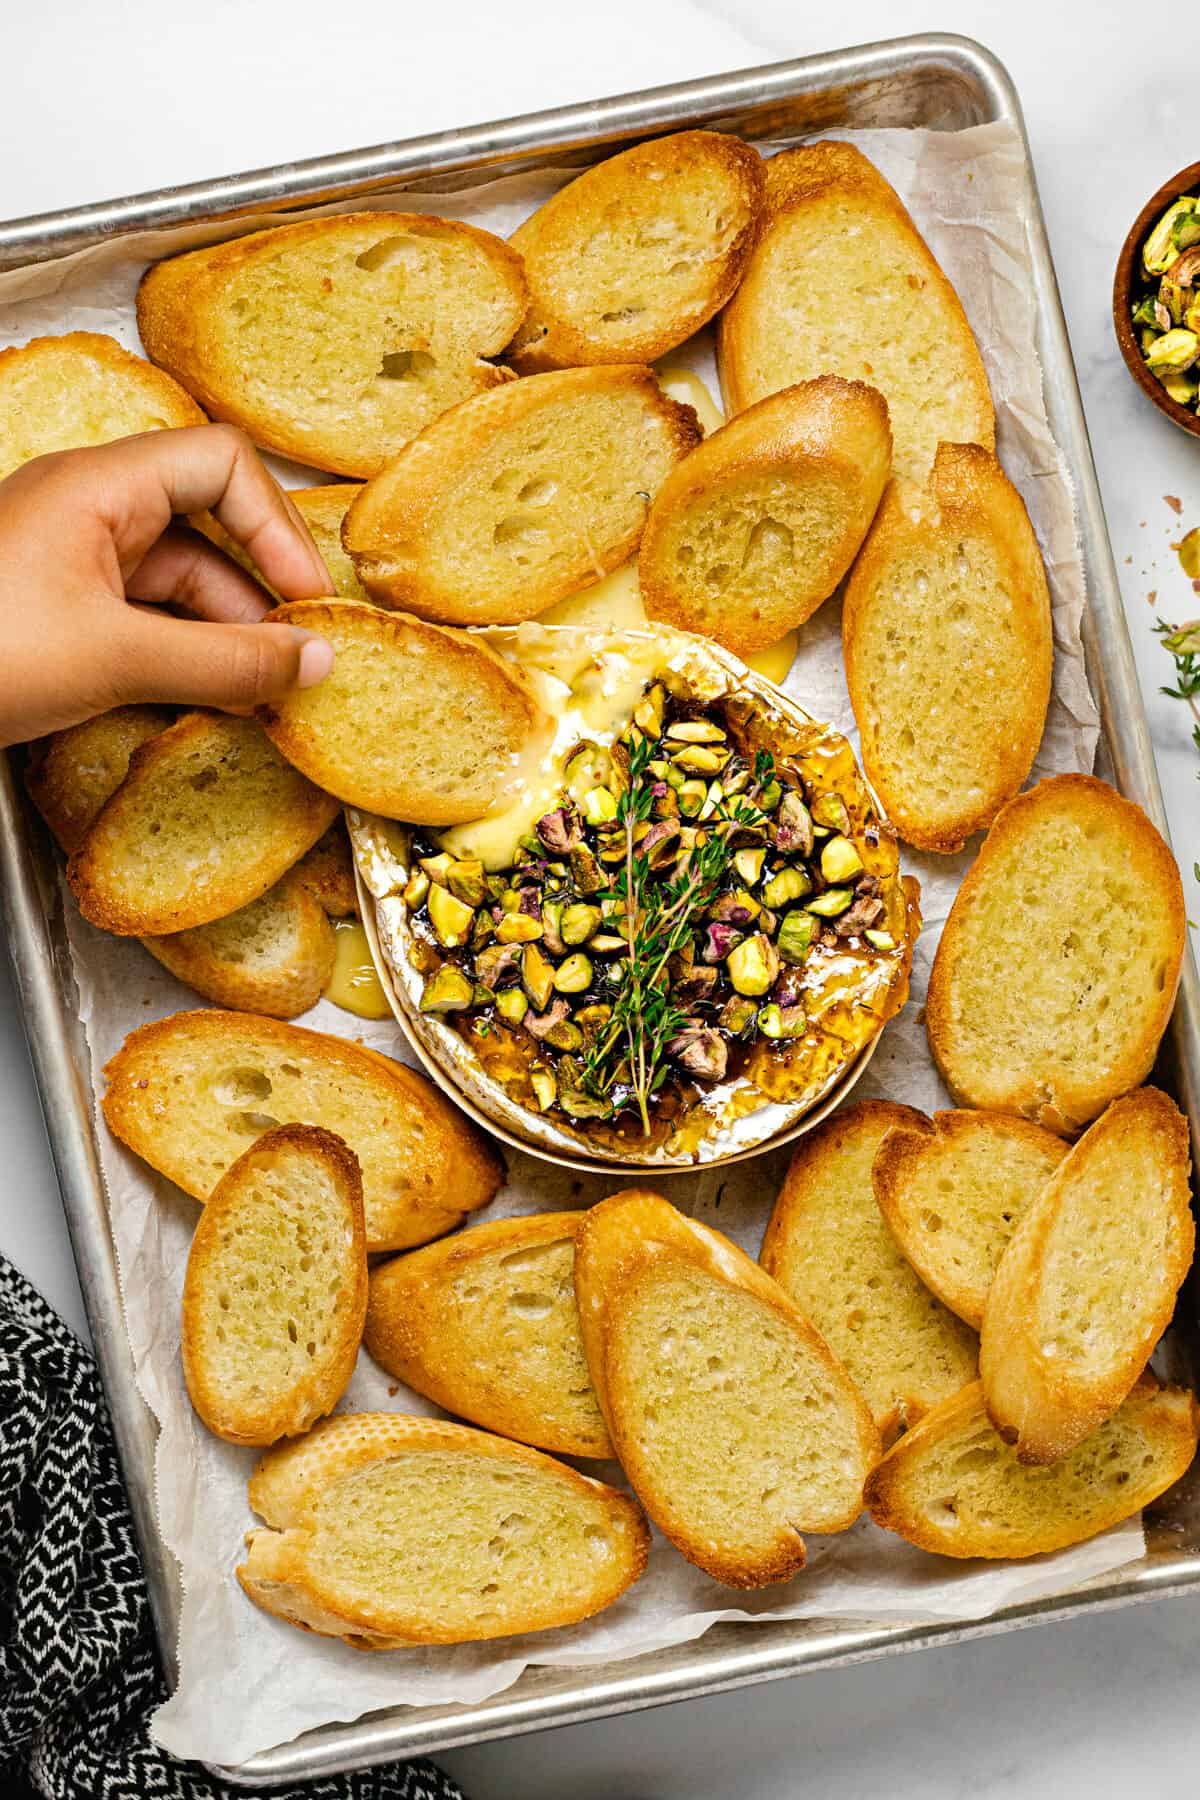 A small hand dipping a crostini into baked brie with fig jam